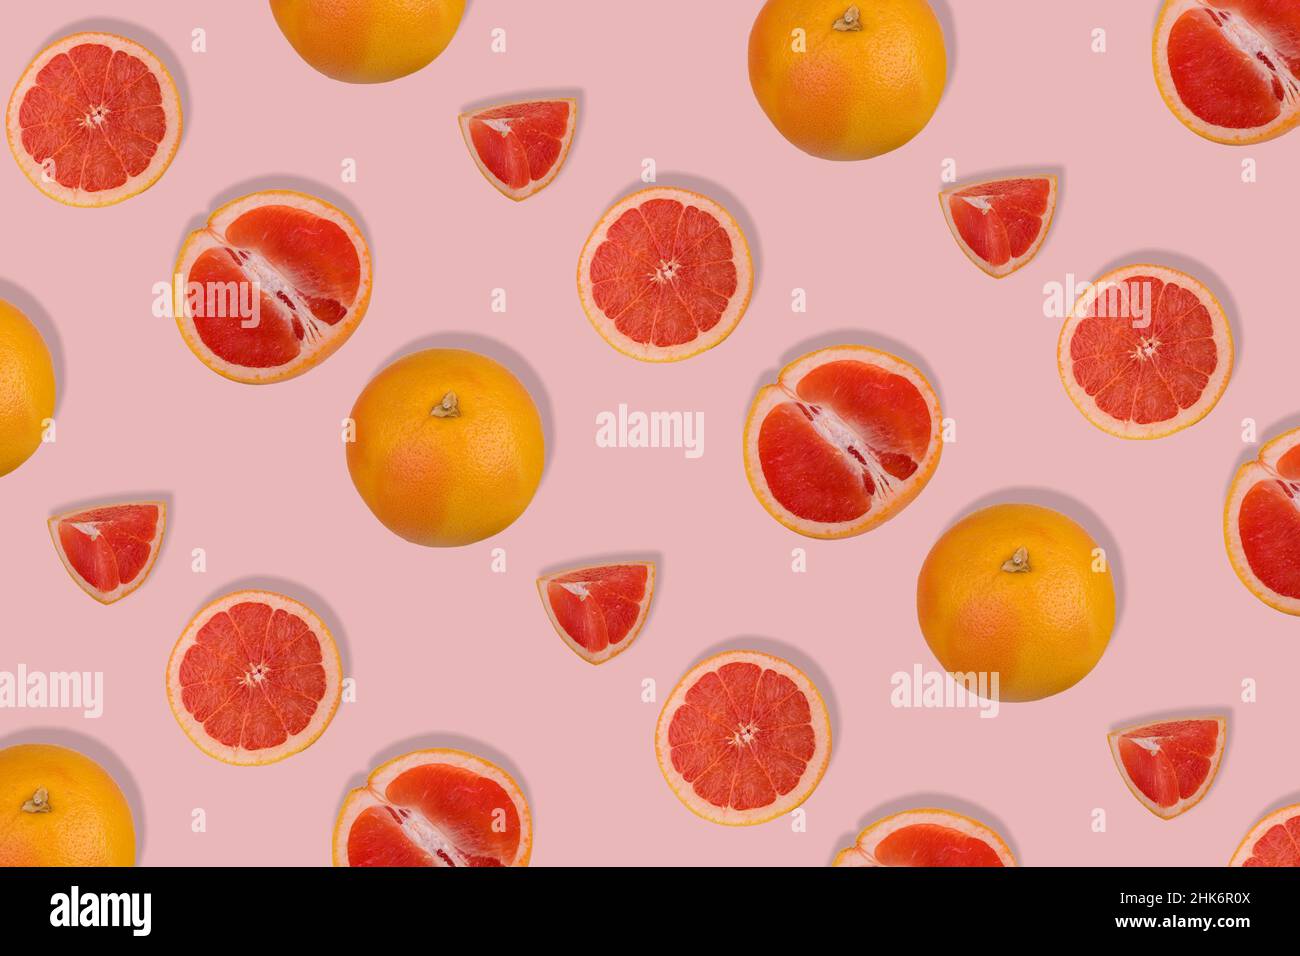 Creative pattern with fresh whole and sliced grapefruit on bright pink background. Minimal fruit concept. Vitamins, healthy diet concept.  Flat lay. Stock Photo